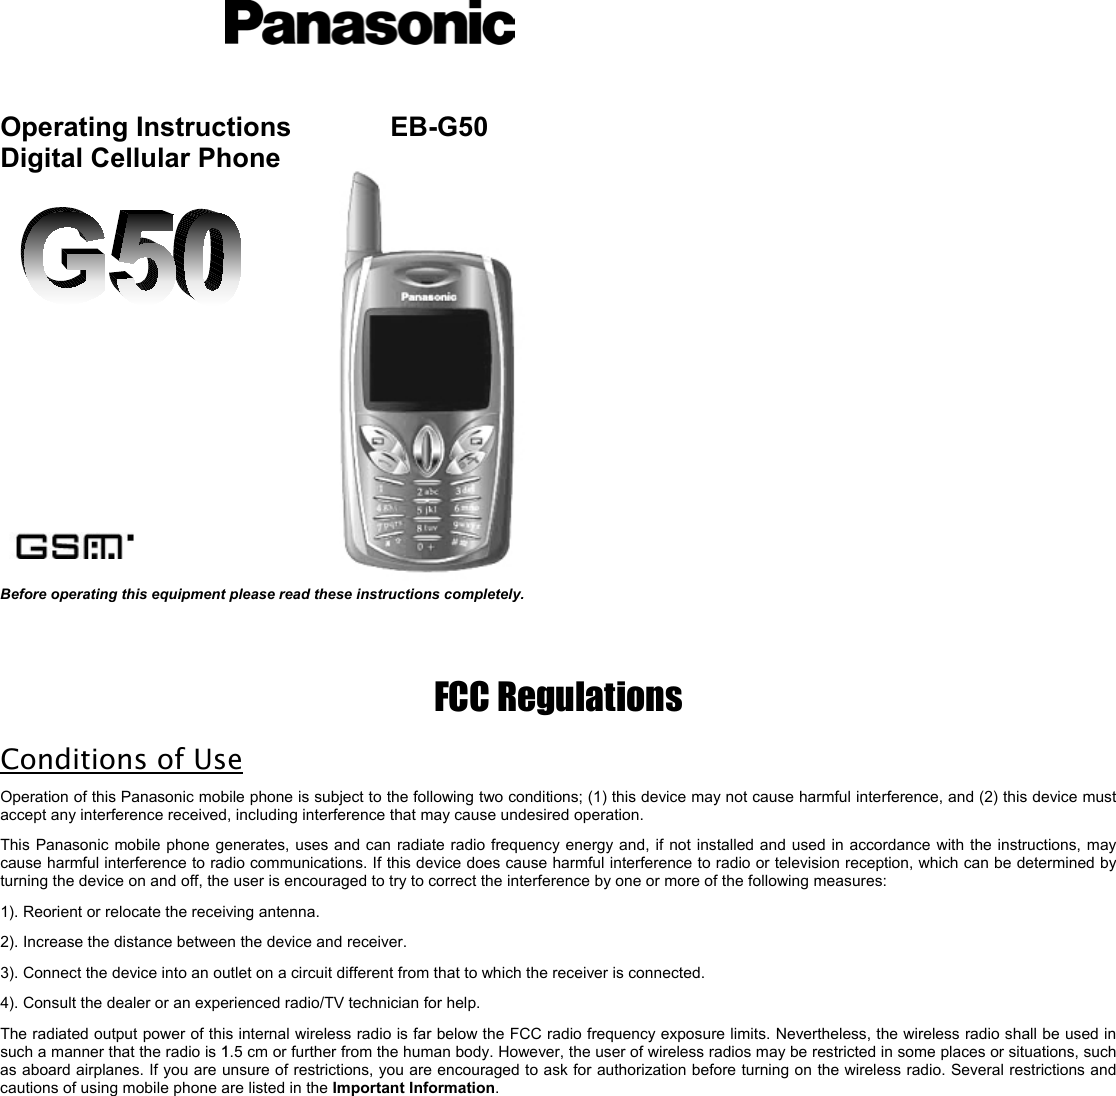       Operating Instructions     EB-G50 Digital Cellular Phone                    Before operating this equipment please read these instructions completely.    FCC Regulations Conditions of Use Operation of this Panasonic mobile phone is subject to the following two conditions; (1) this device may not cause harmful interference, and (2) this device must accept any interference received, including interference that may cause undesired operation.  This Panasonic mobile phone generates, uses and can radiate radio frequency energy and, if not installed and used in accordance with the instructions, may cause harmful interference to radio communications. If this device does cause harmful interference to radio or television reception, which can be determined by turning the device on and off, the user is encouraged to try to correct the interference by one or more of the following measures:     1). Reorient or relocate the receiving antenna. 2). Increase the distance between the device and receiver. 3). Connect the device into an outlet on a circuit different from that to which the receiver is connected. 4). Consult the dealer or an experienced radio/TV technician for help. The radiated output power of this internal wireless radio is far below the FCC radio frequency exposure limits. Nevertheless, the wireless radio shall be used in such a manner that the radio is 1.5 cm or further from the human body. However, the user of wireless radios may be restricted in some places or situations, such as aboard airplanes. If you are unsure of restrictions, you are encouraged to ask for authorization before turning on the wireless radio. Several restrictions and cautions of using mobile phone are listed in the Important Information.                                                                                                        